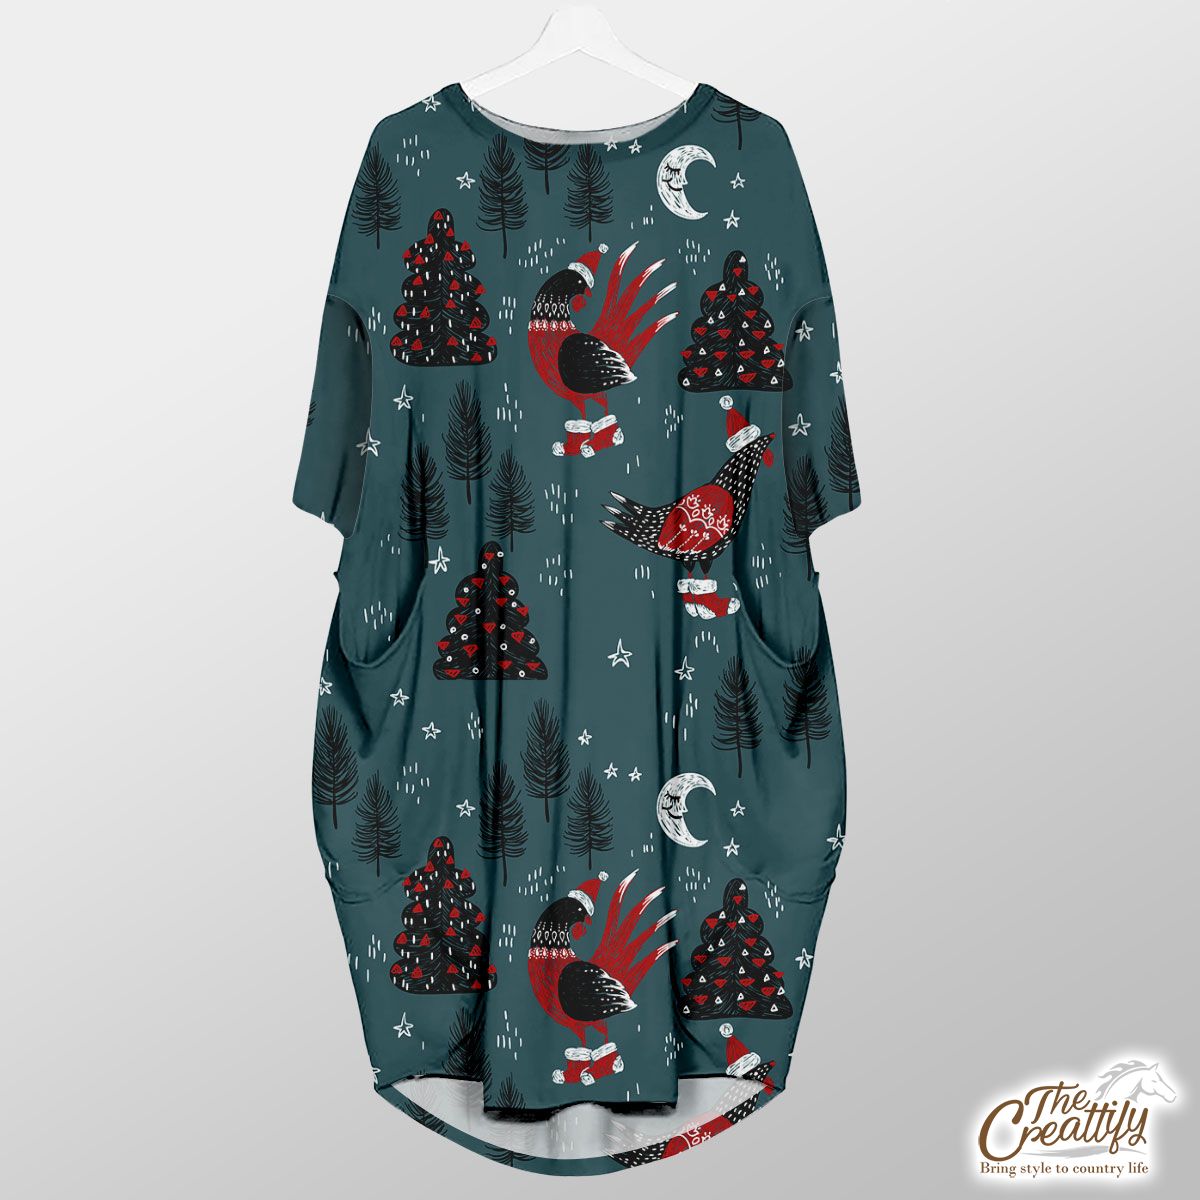 Christmas Turkey With Santa Hat, Sweater And Red Socks On The Pine Tree Background Pocket Dress